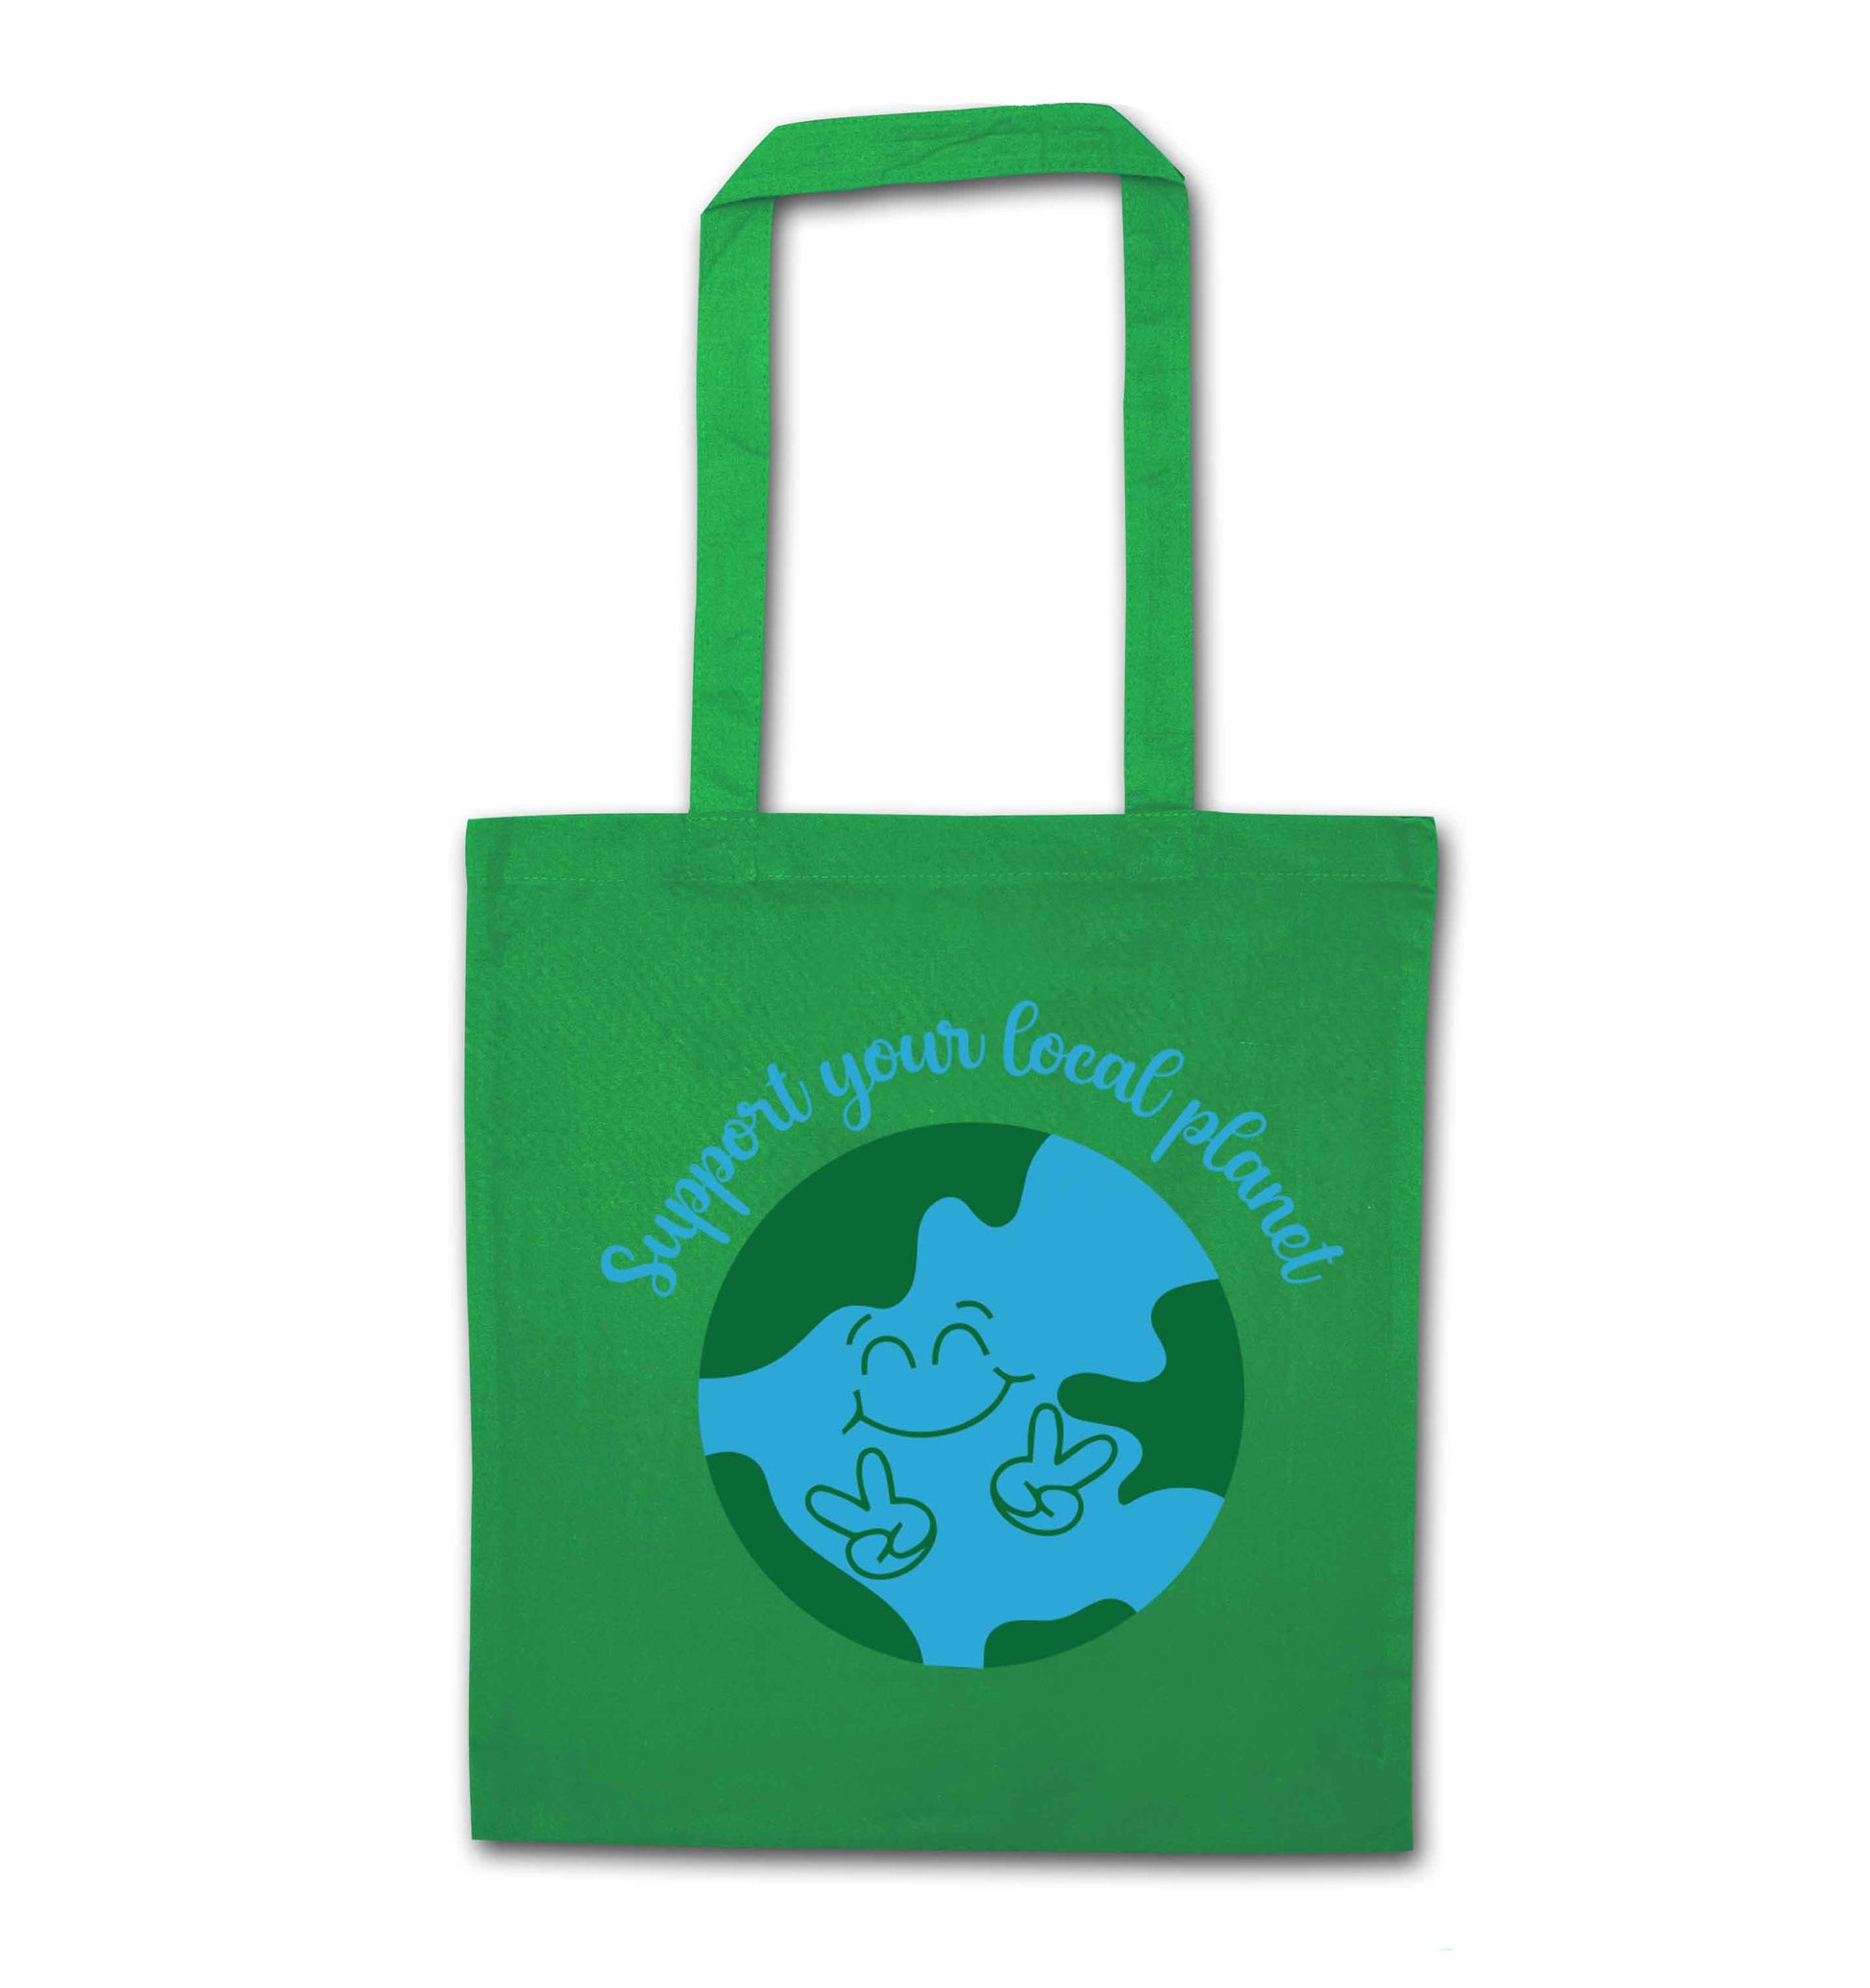 Support your local planet green tote bag